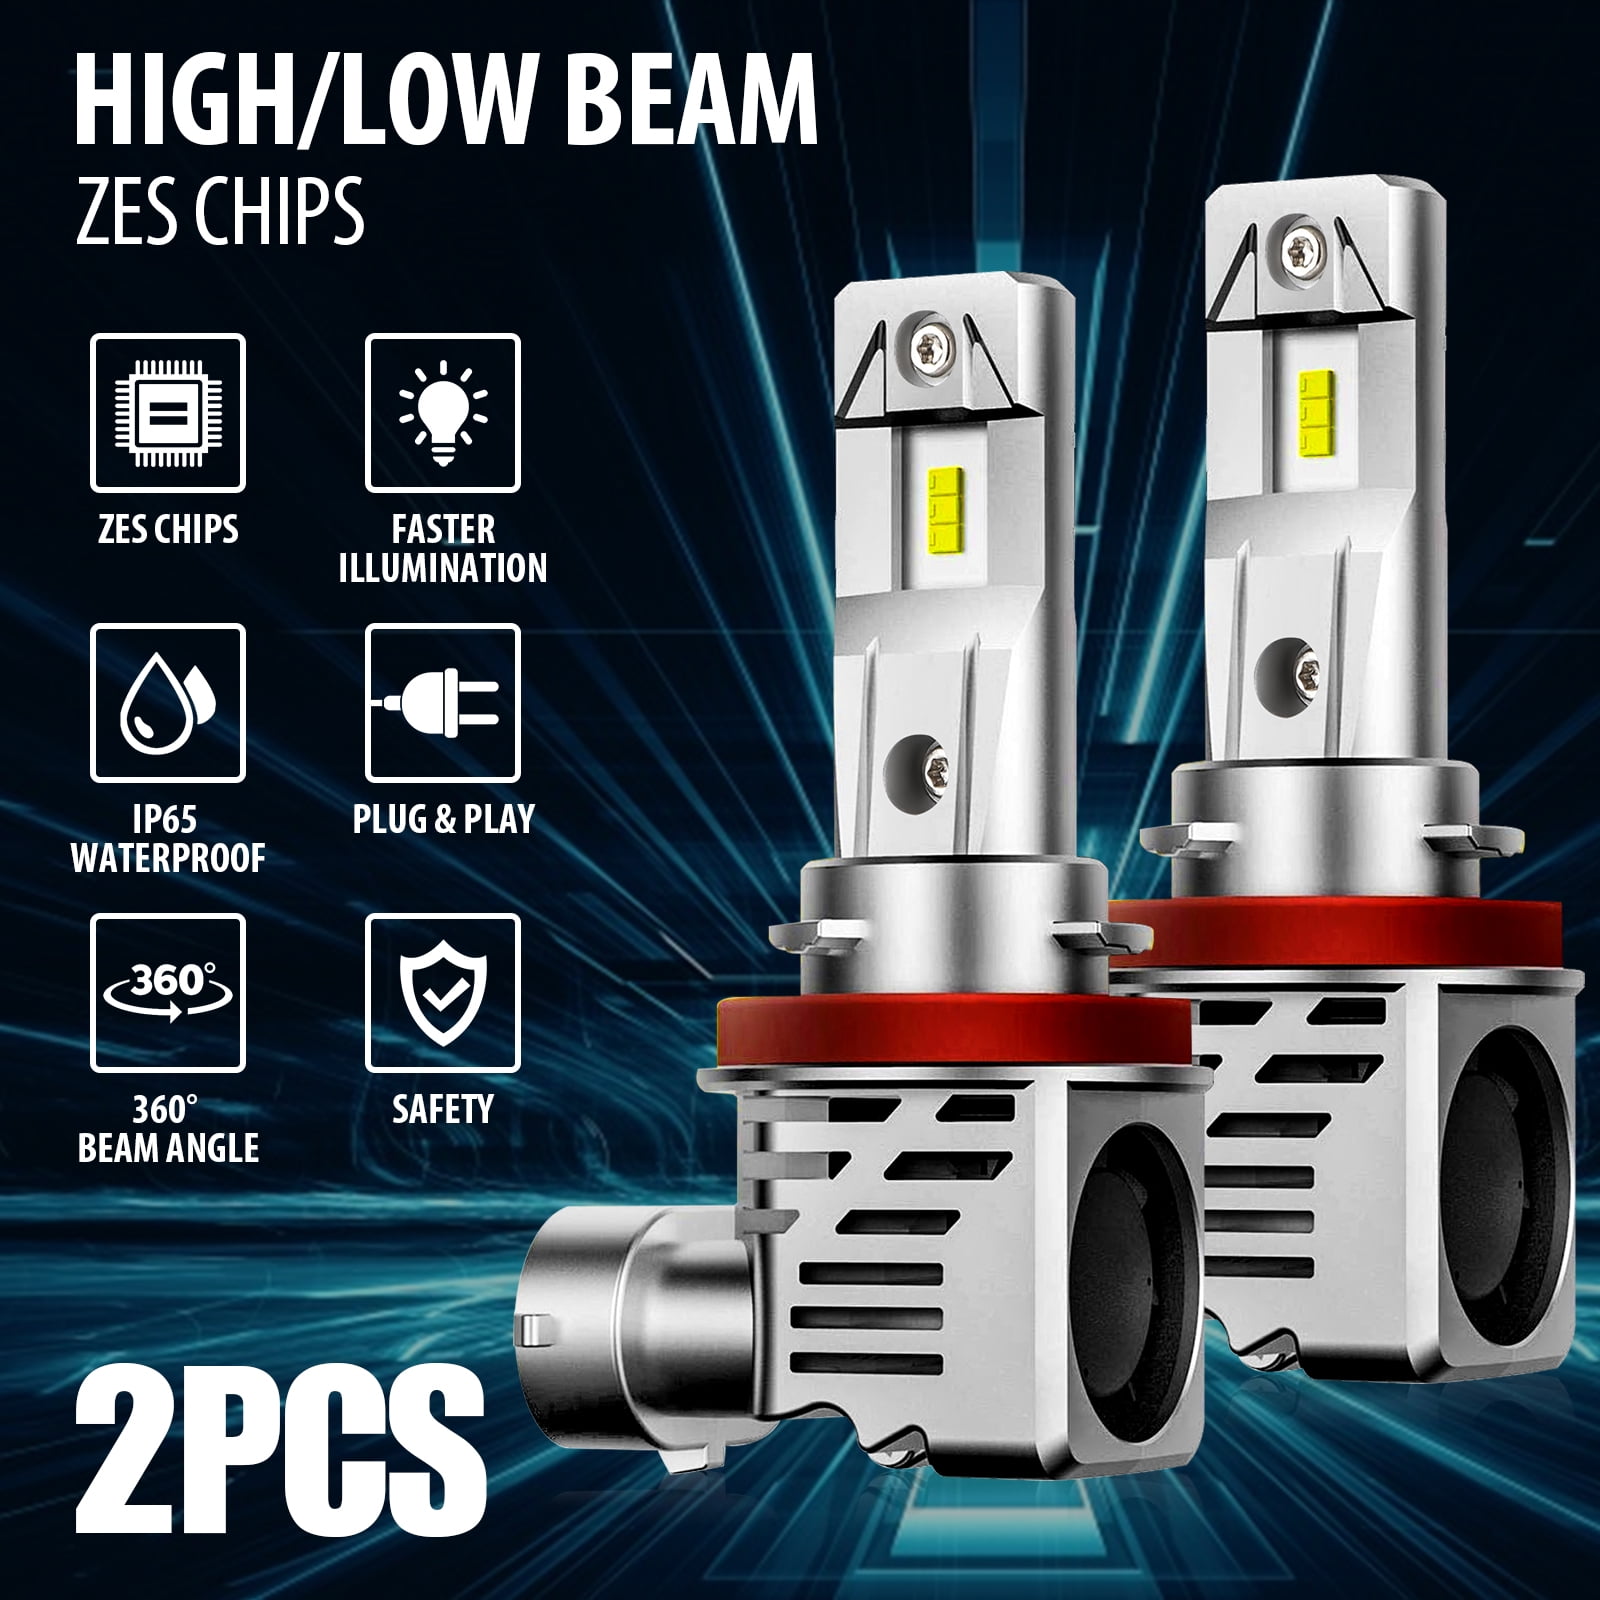 2pcs H11 H8 H9 LED Headlight Bulbs, EEEkit 28W 24000LM 6500K Cool White  200% Brighter Wireless Headlight LED Bulb, IP65 Waterproof, 360°Beam,  Built-in IC Driver and Fan Cooling 